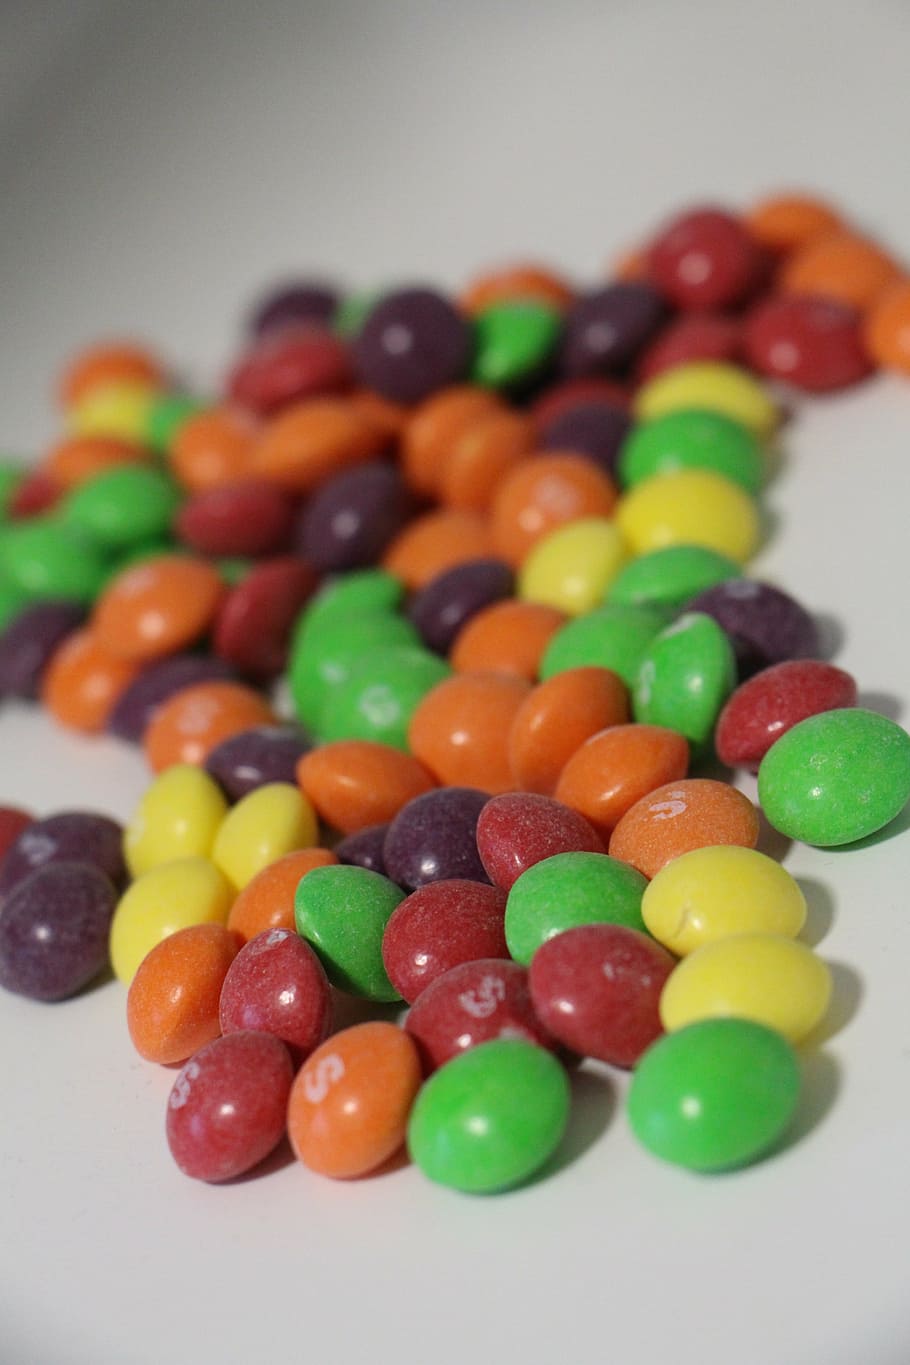 smarties, candy, colorful, chocolate lentils, multi colored, food, food and drink, sweet food, sweet, indulgence